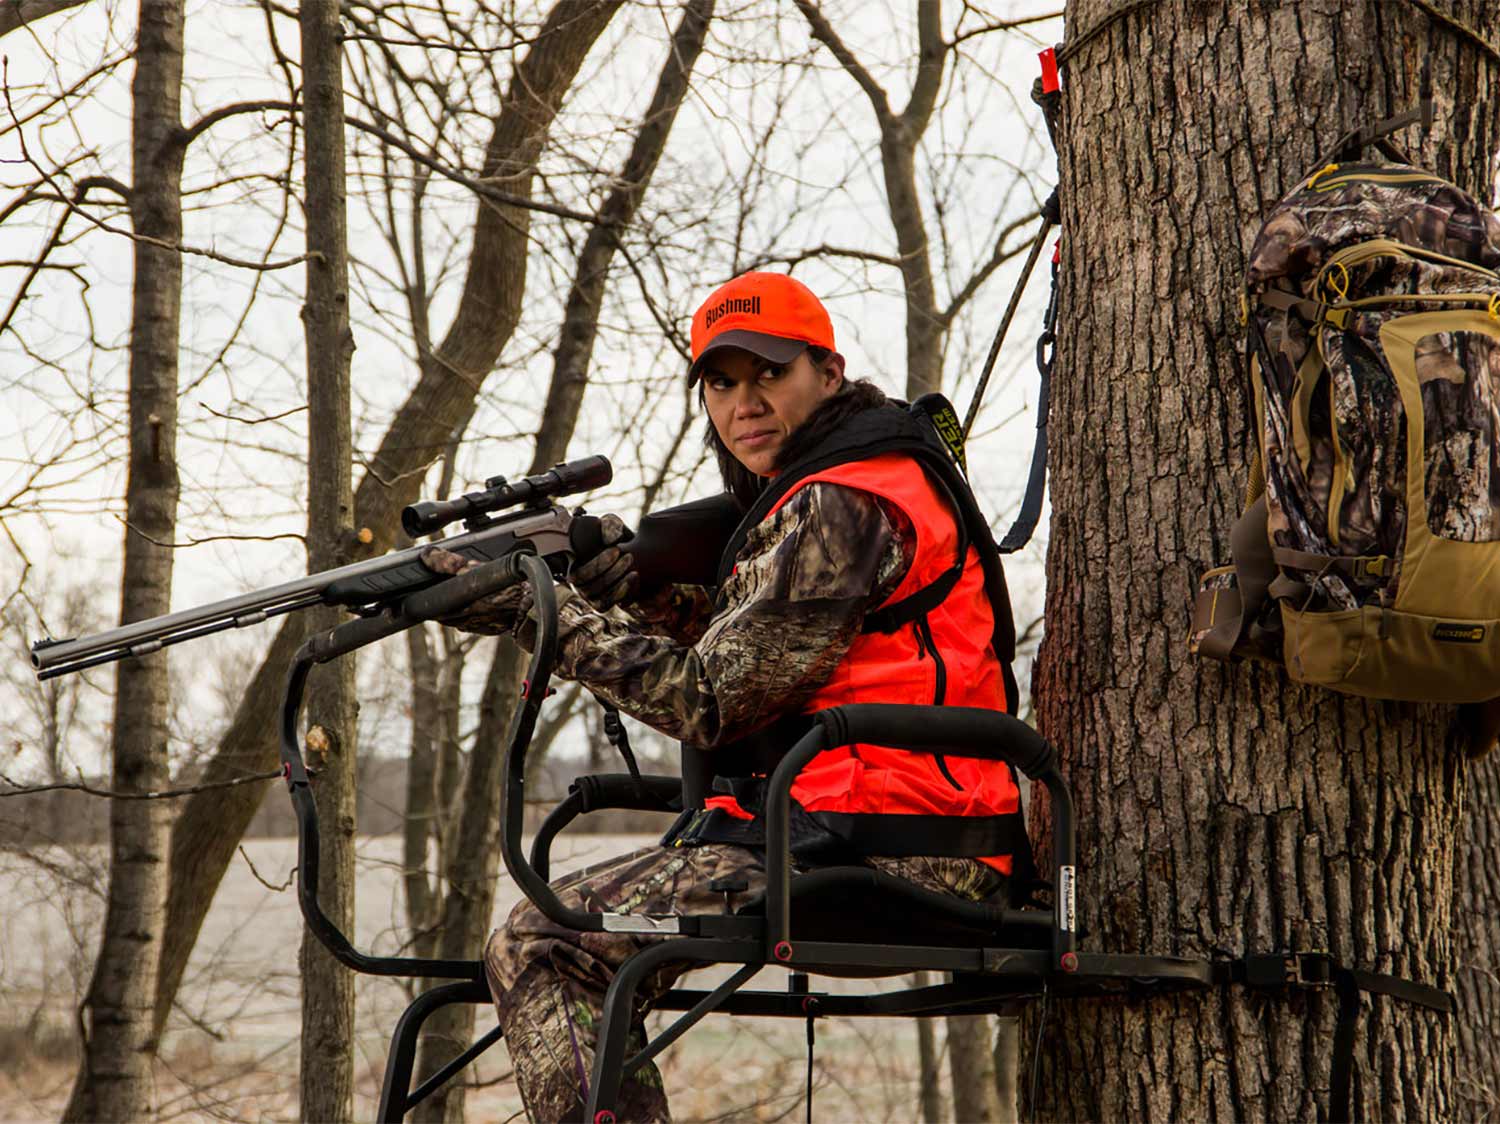 A woman hunter in full camo and an orange vest holds a scoped rifle while seated in a tree stand.